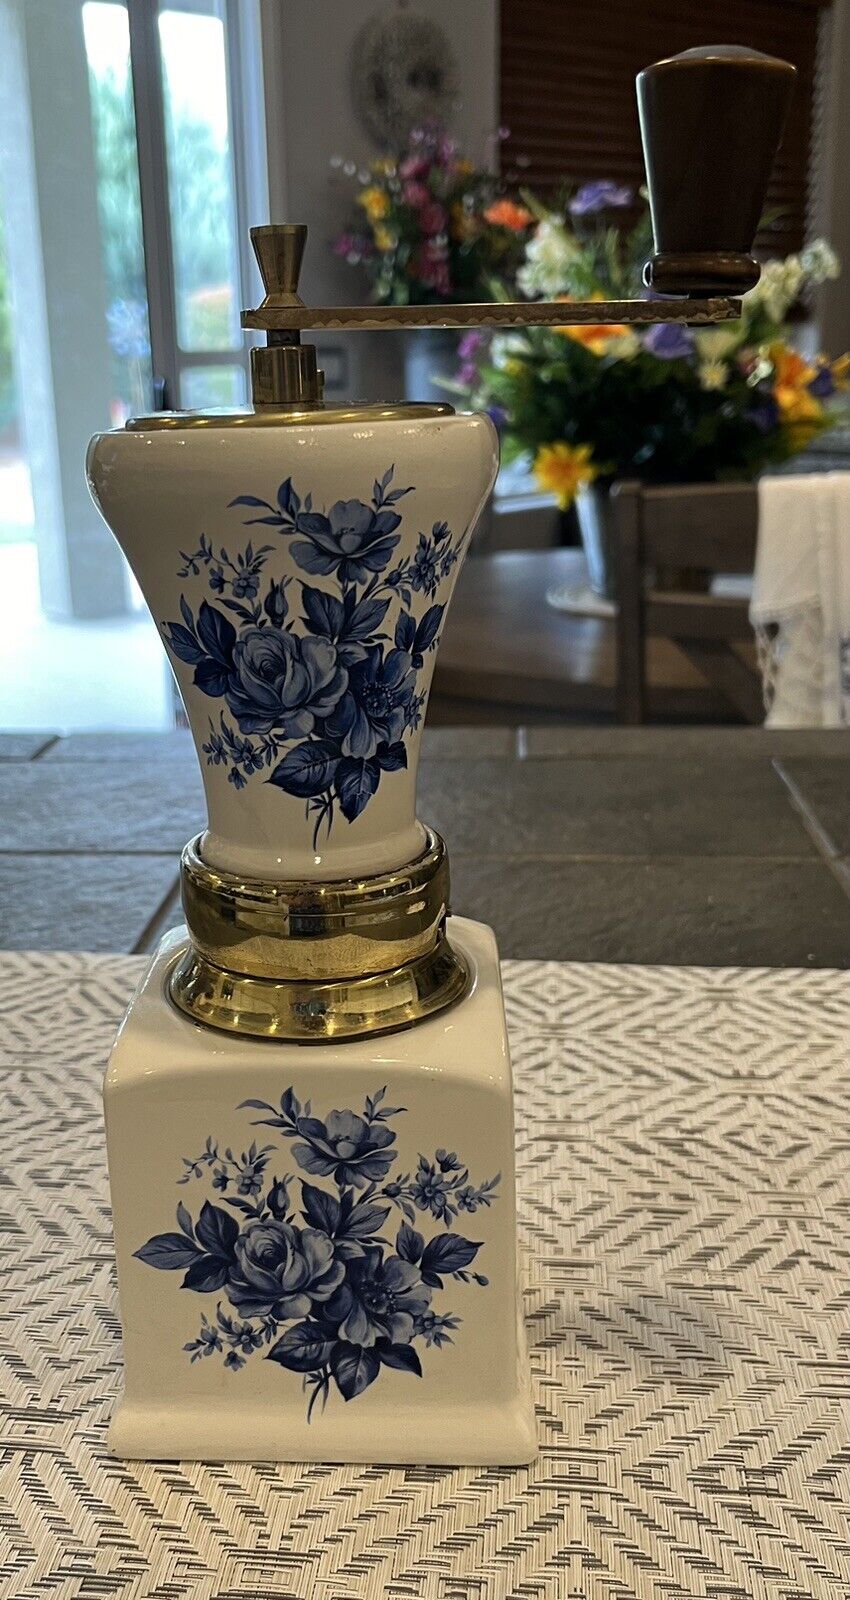 Vintage White & Blue Rose Porcelain Coffee Grinder Brass Trim From Italy      B1